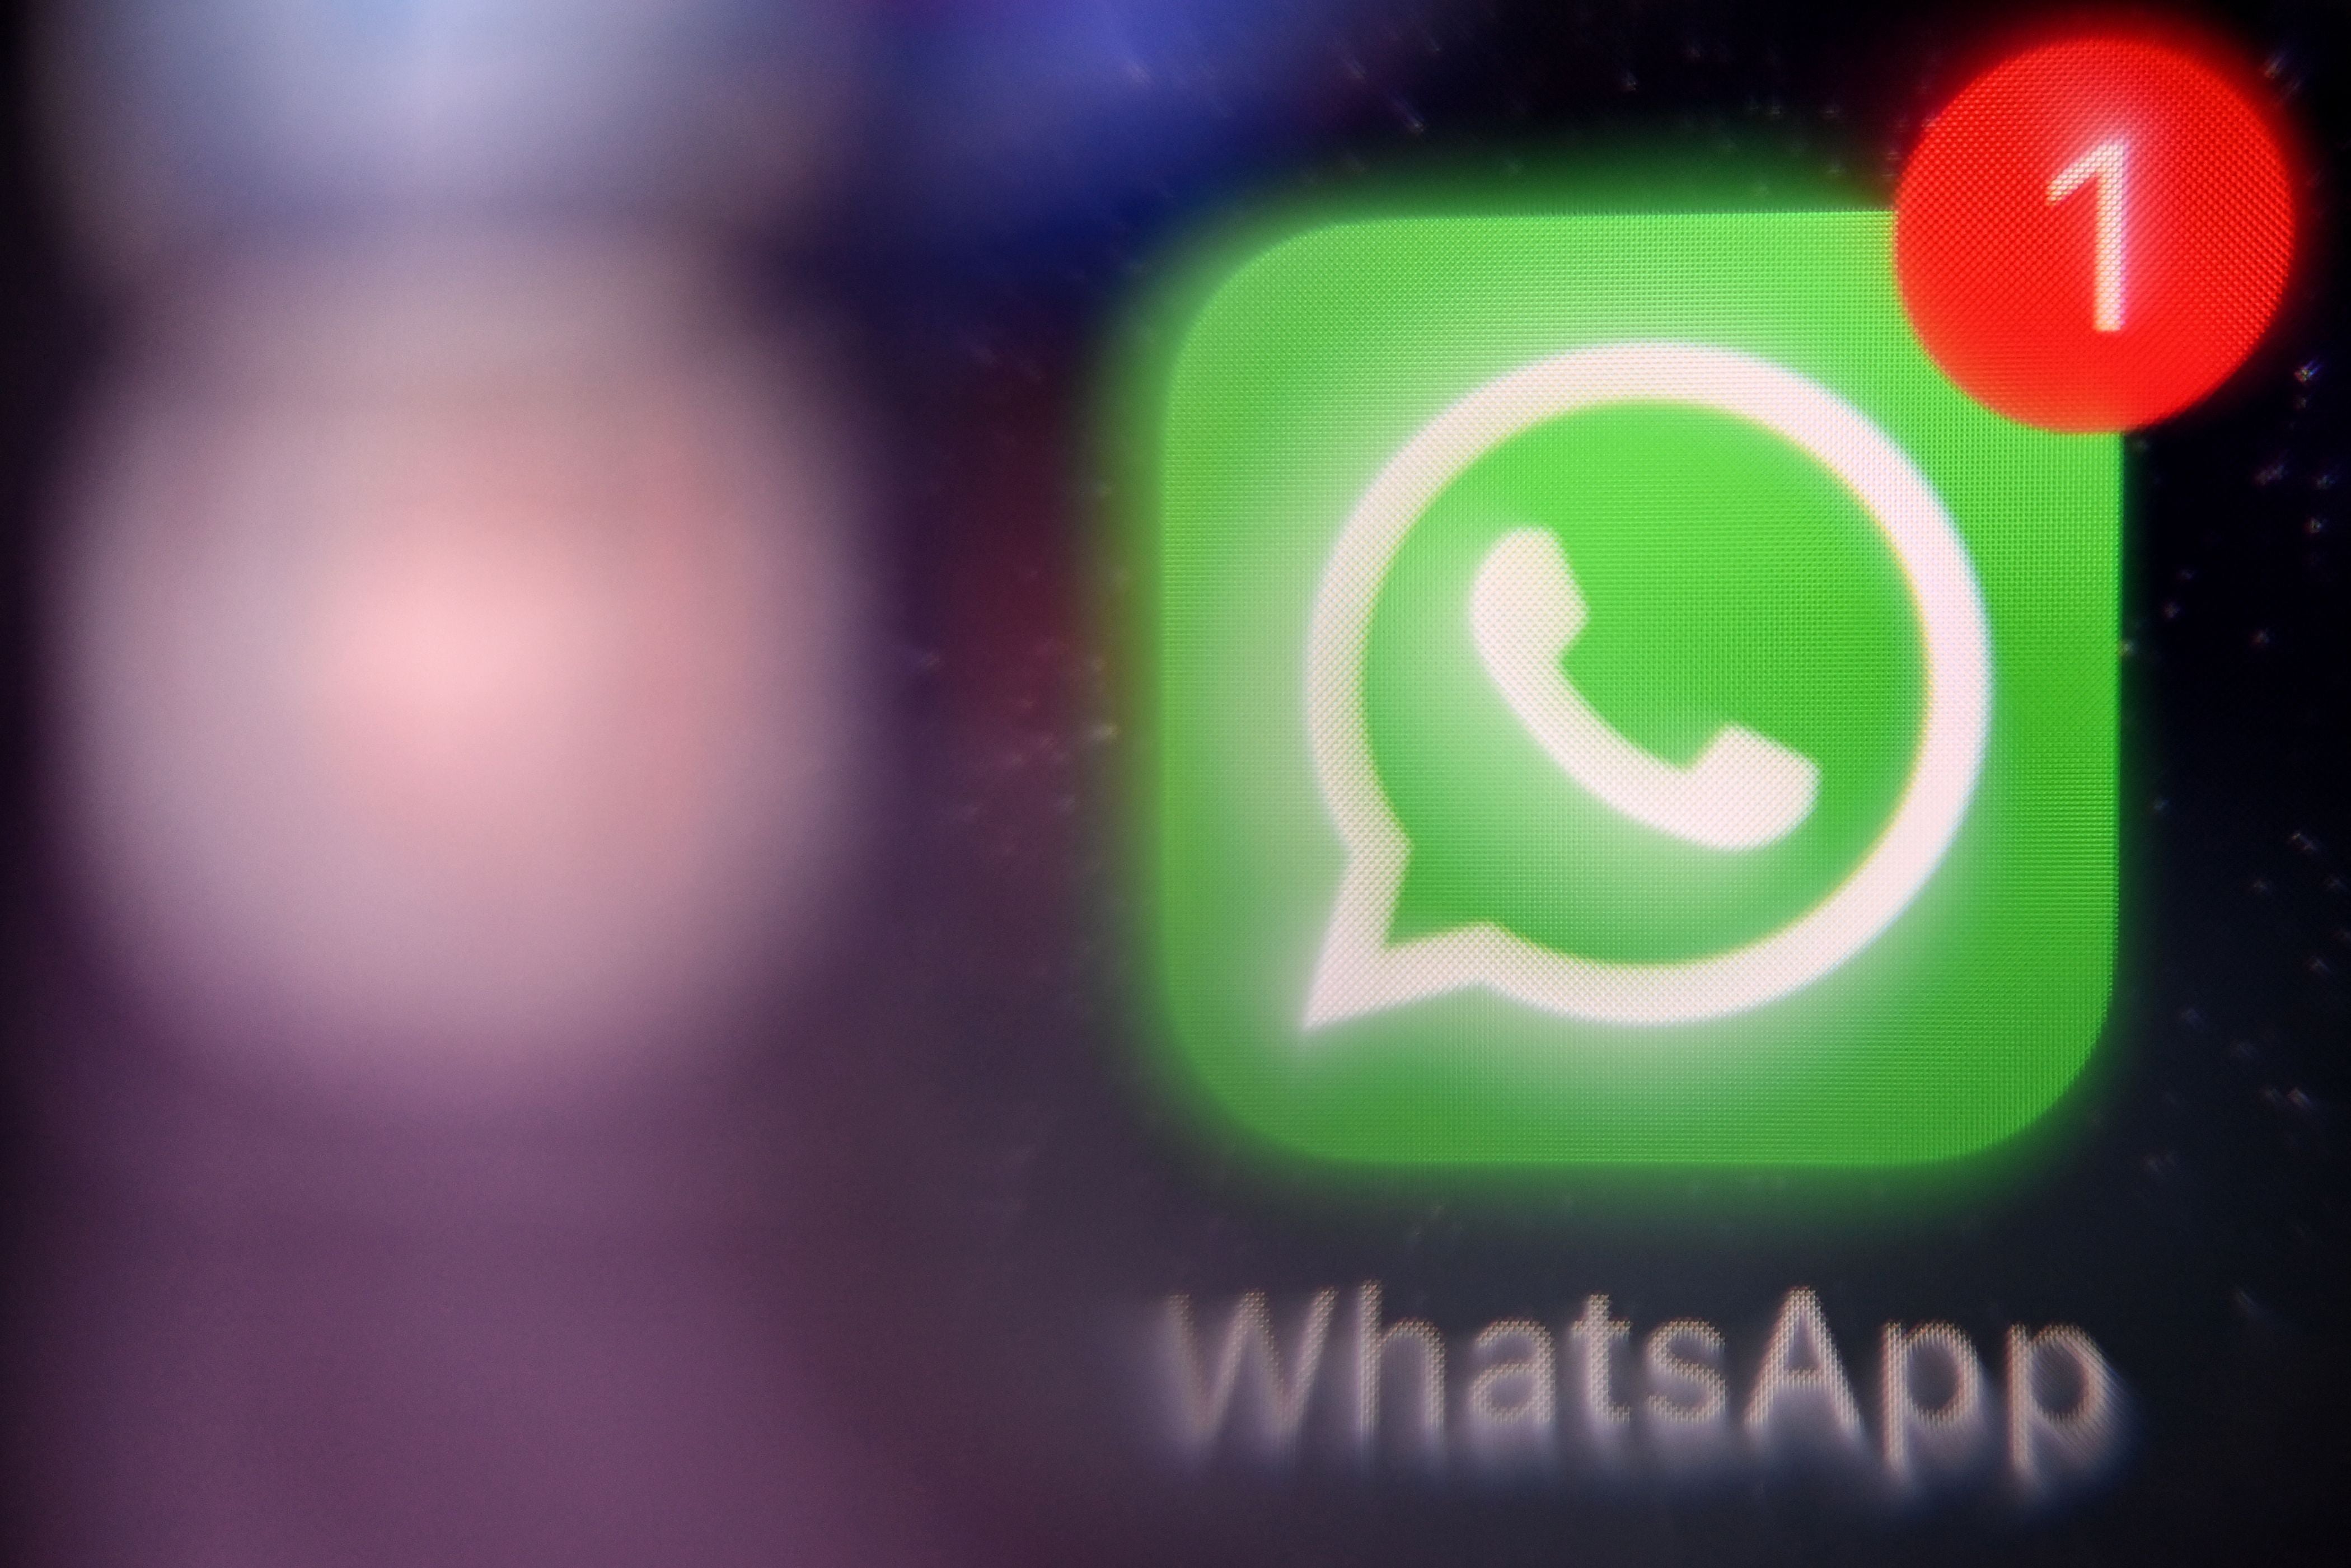 WhatsApp's new feature to show profile info in chats on Android